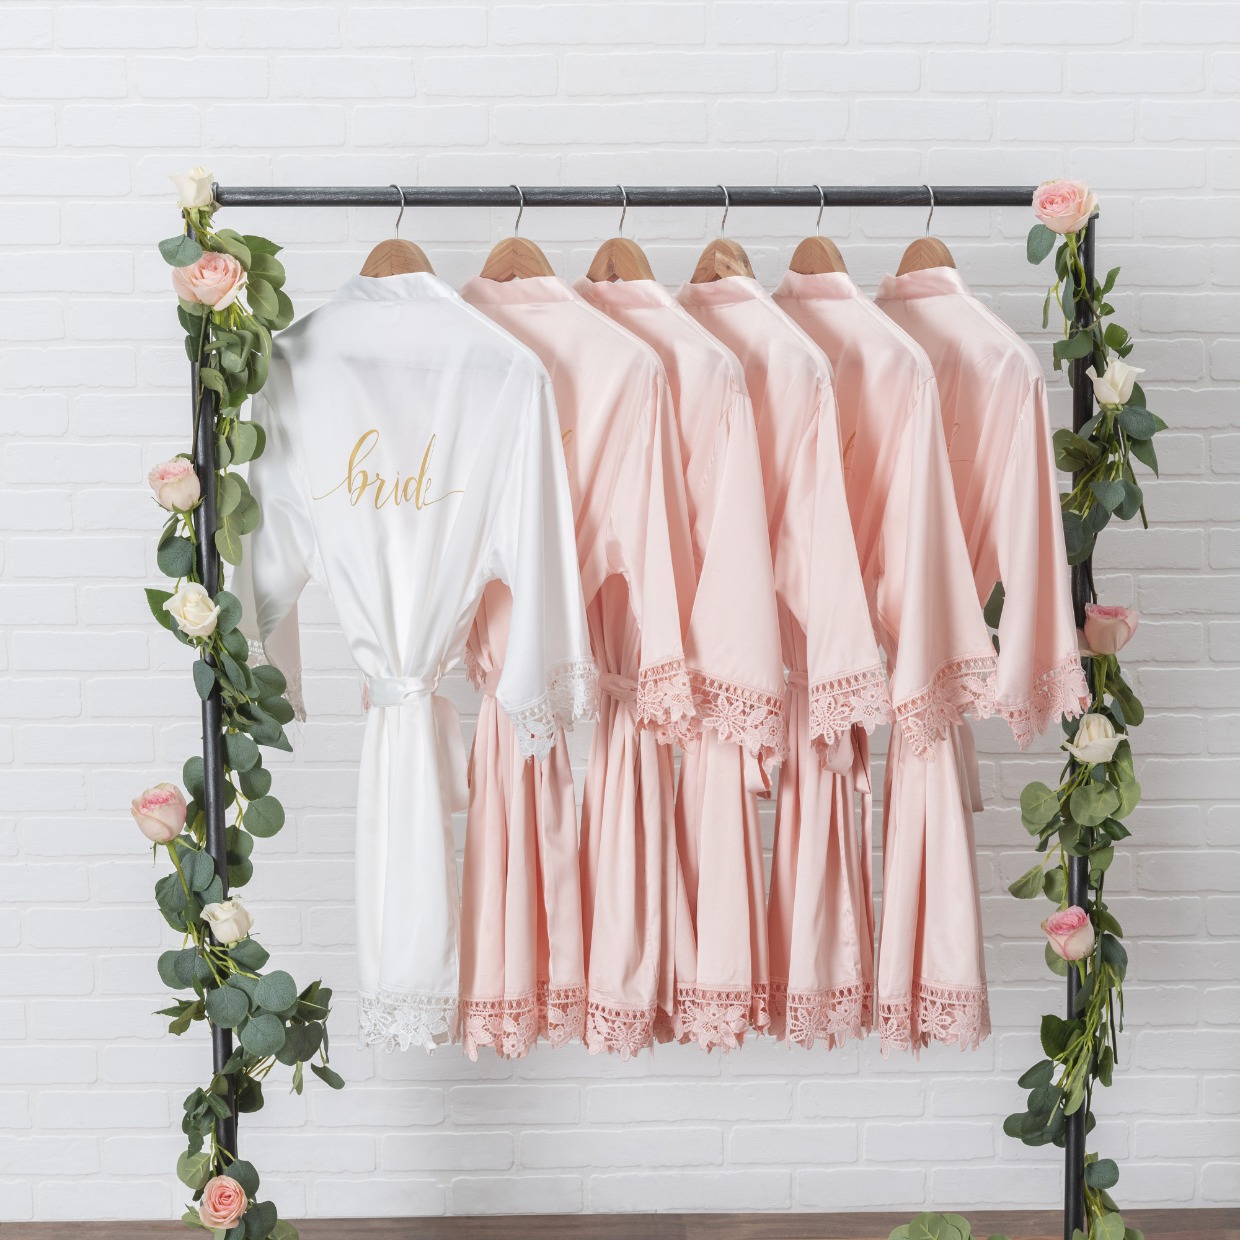 lace trimmed bridesmaid robes